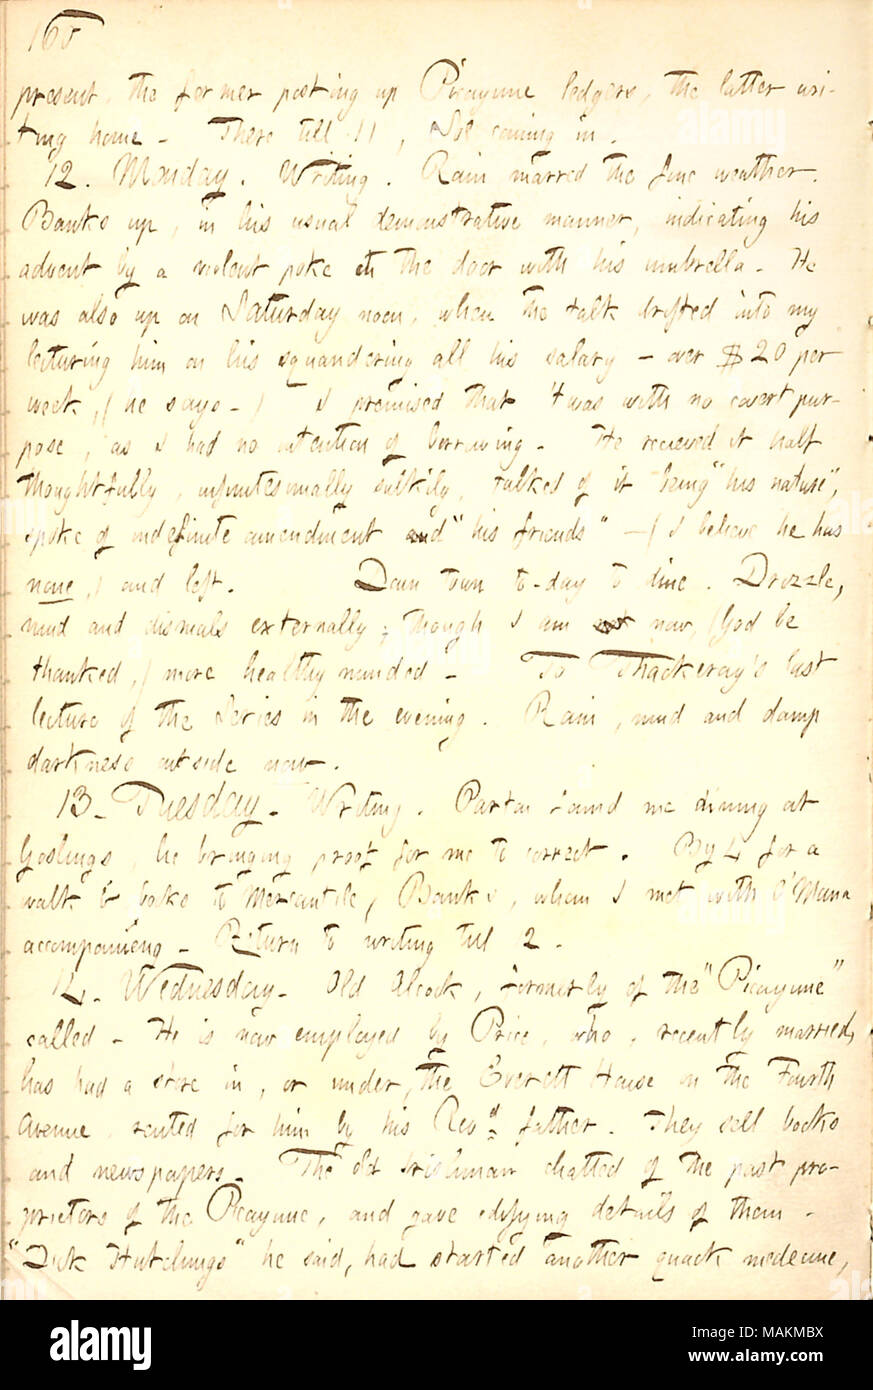 Describes lecturing A.F. Banks about money, and a visit from Mr. Alcock.  Transcription: present, the former posting up Picayune ledgers, the latter writing home. There till 11, Sol [Eytinge] coming in. 12. Monday. Writing. Rain marred the fine weather. [A.F.] Banks up, in his usual demonstrative manner, indicating his advent by a violent poke at the door with his umbrella. He was also up on Saturday noon, when the talk drifted into my lecturing him on his squandering all his salary  ? over $20 per week, (he says.) I promised that  ?twas with no covert purpose, as I had no intention of borrowi Stock Photo